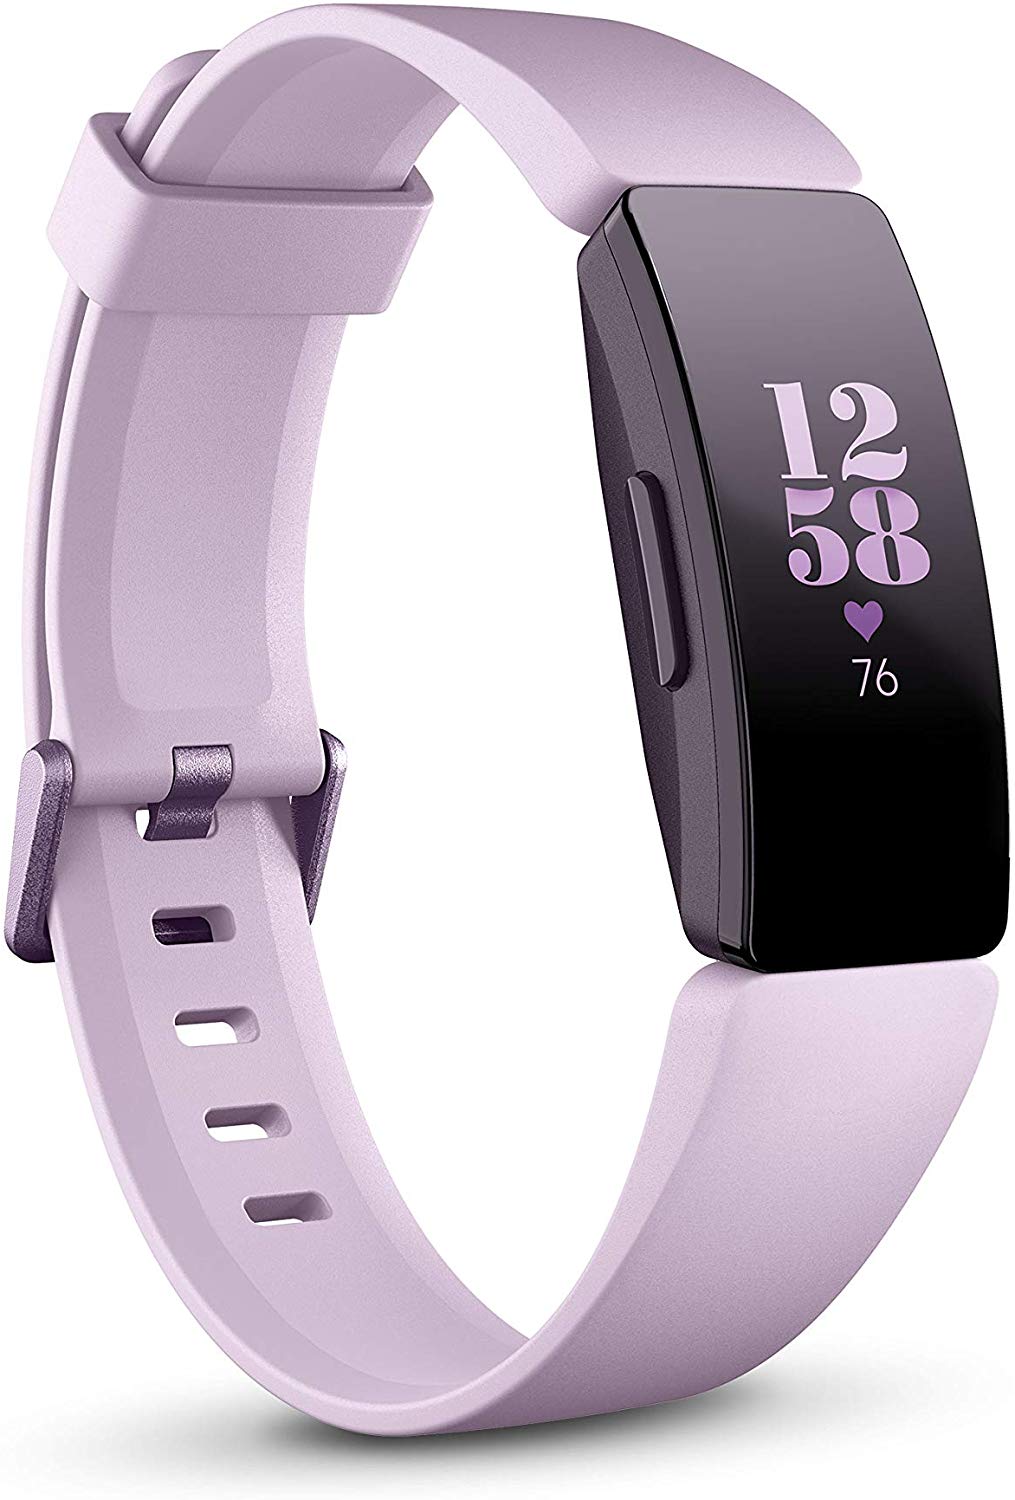 the cheapest fitbit